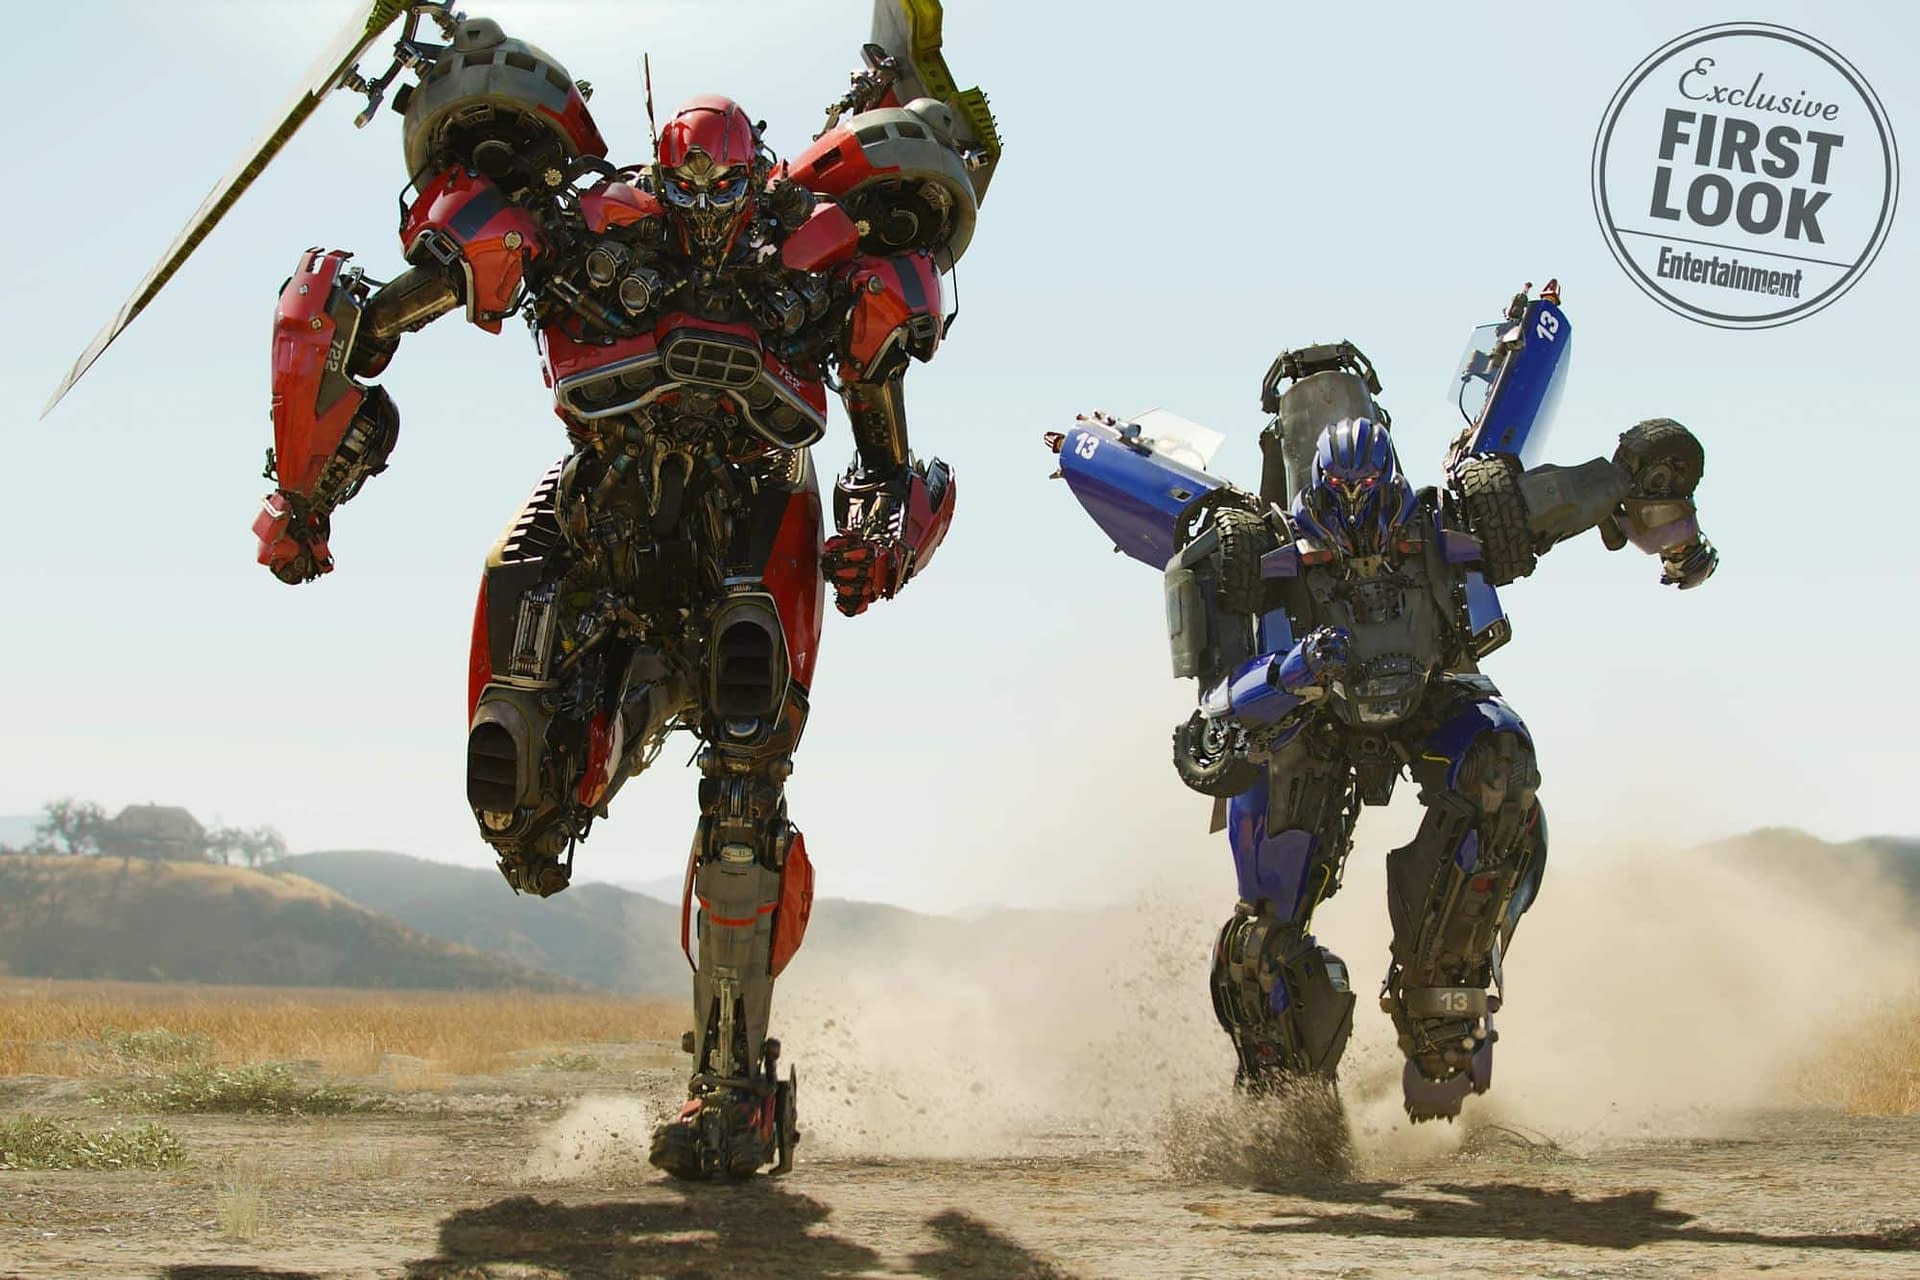 First Look at the Two Decepticons in 'Bumblebee'